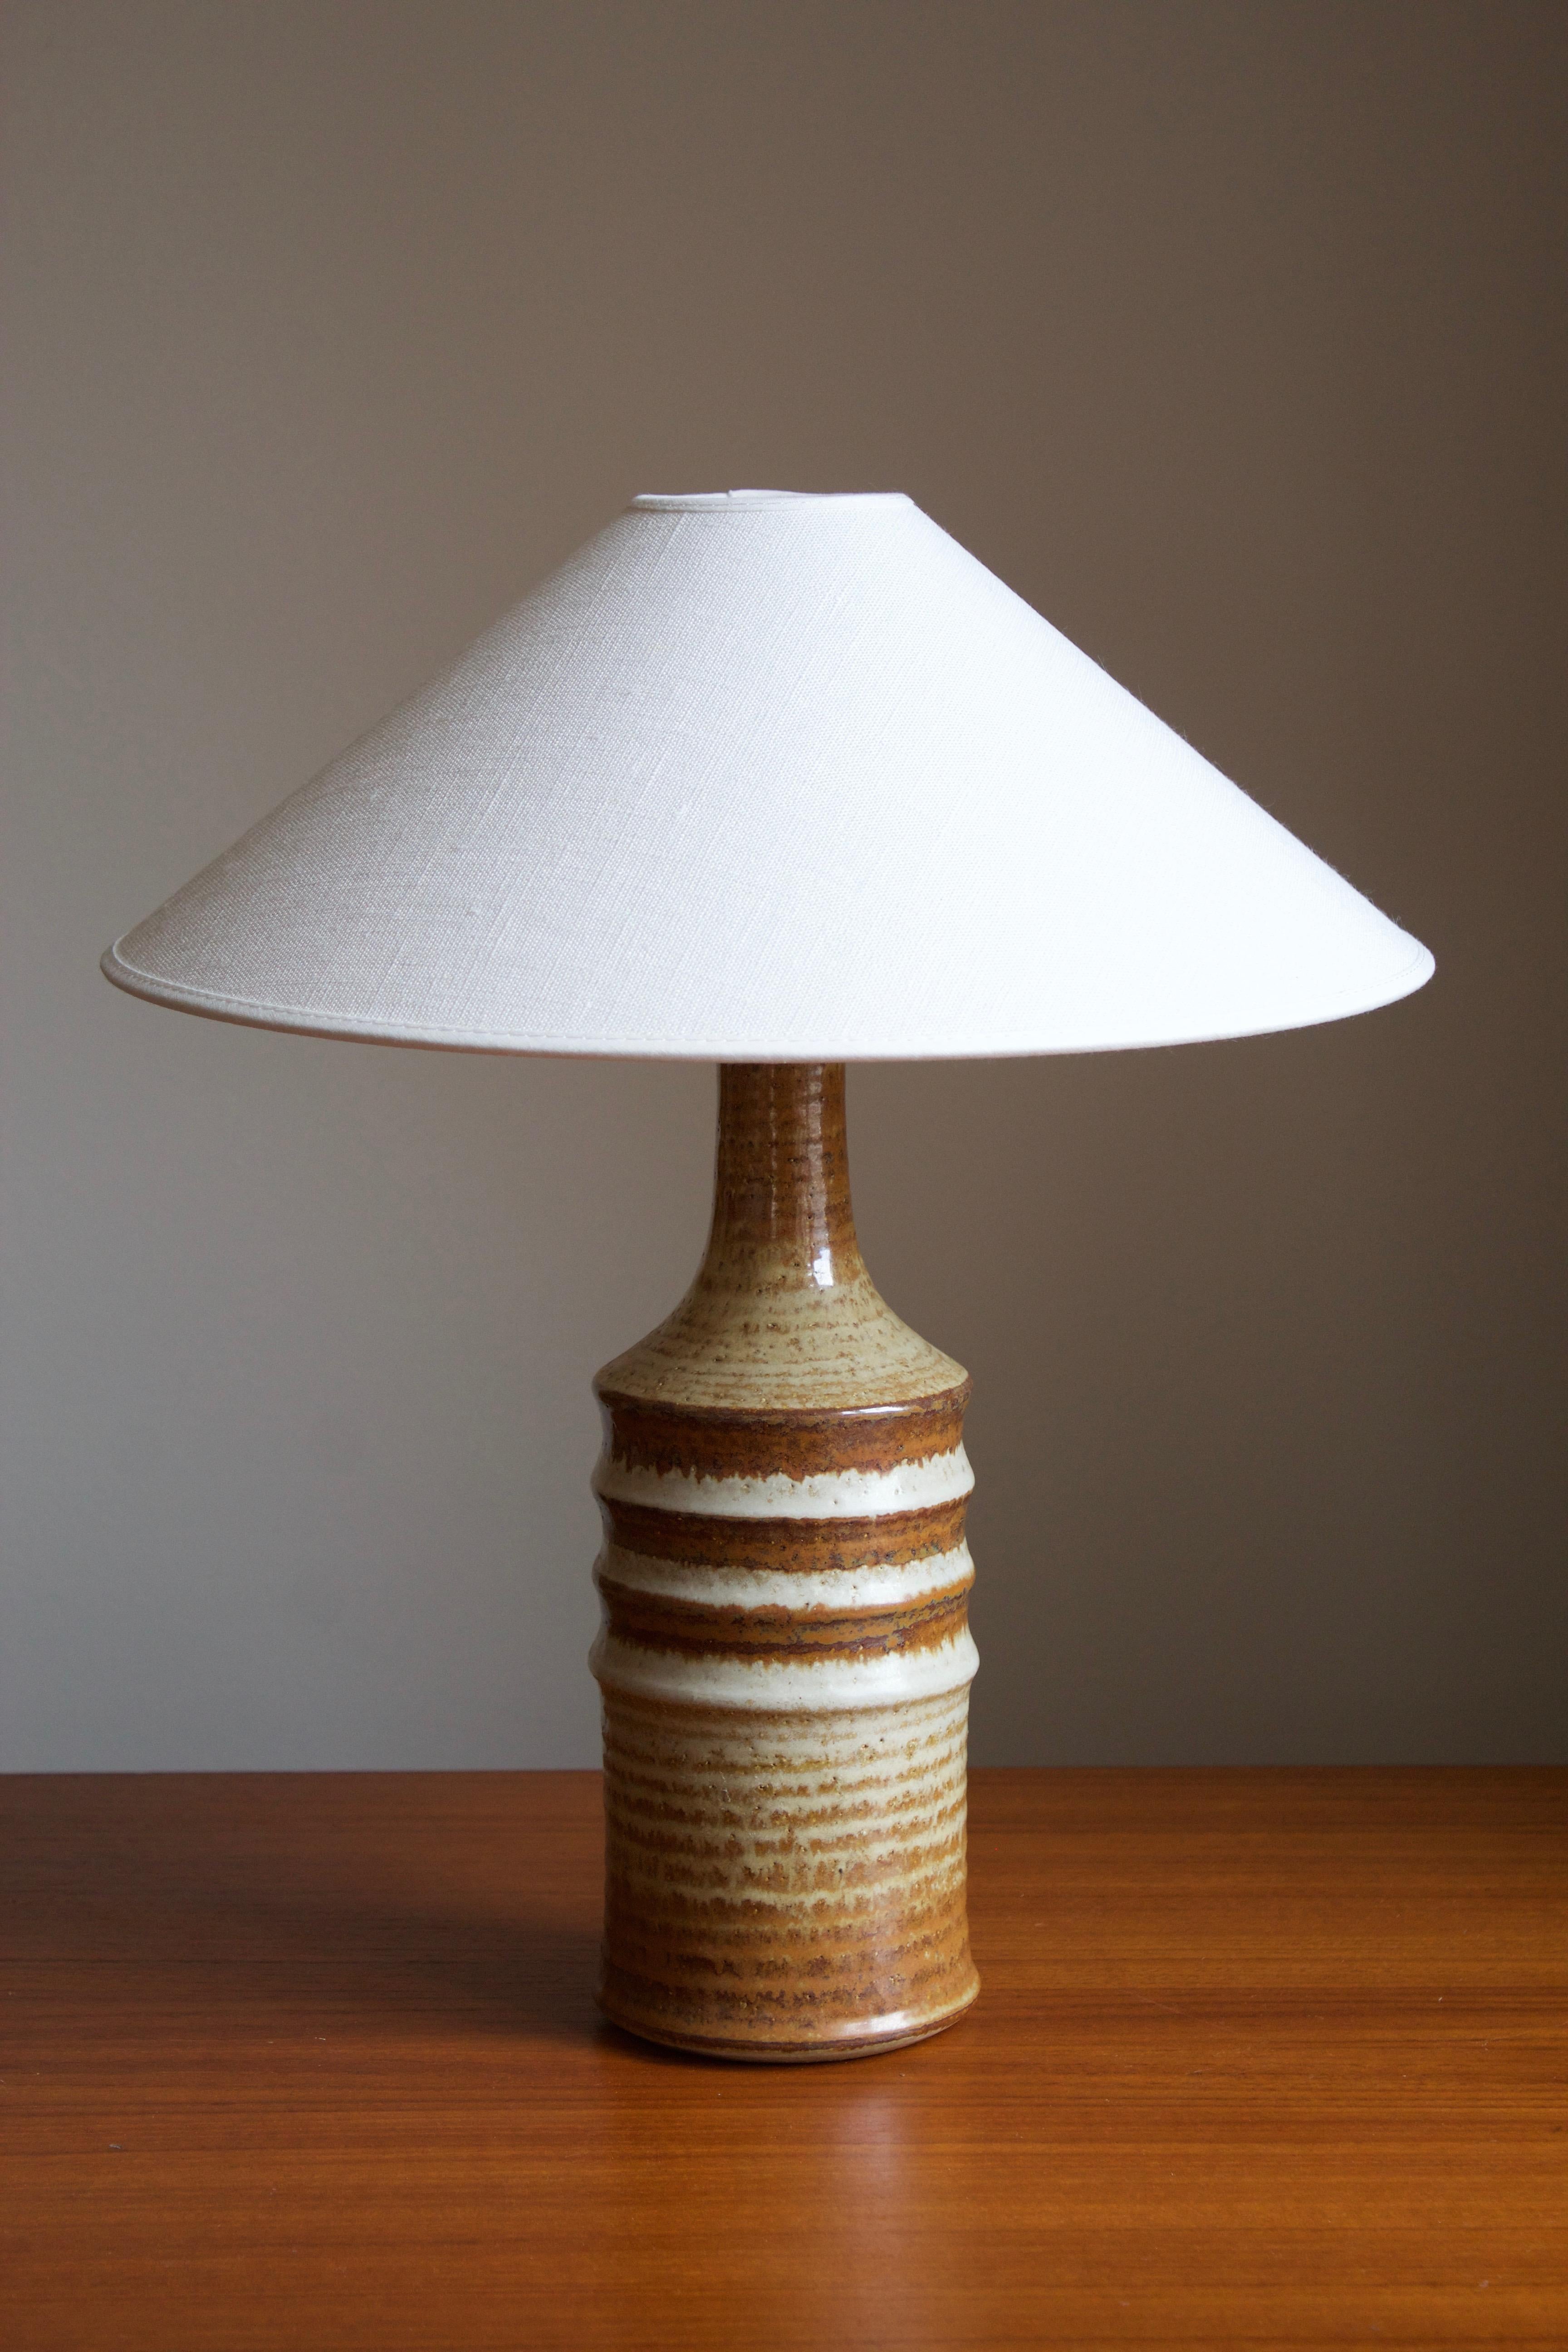 A table lamp produced by Søholm Keramik, located on the island of Bornholm in Denmark. Features a highly artistic glazed and incised decor.

Sold without lampshade. Stated dimensions exclude the lampshade.

Glaze features brown-beige colors.

Other